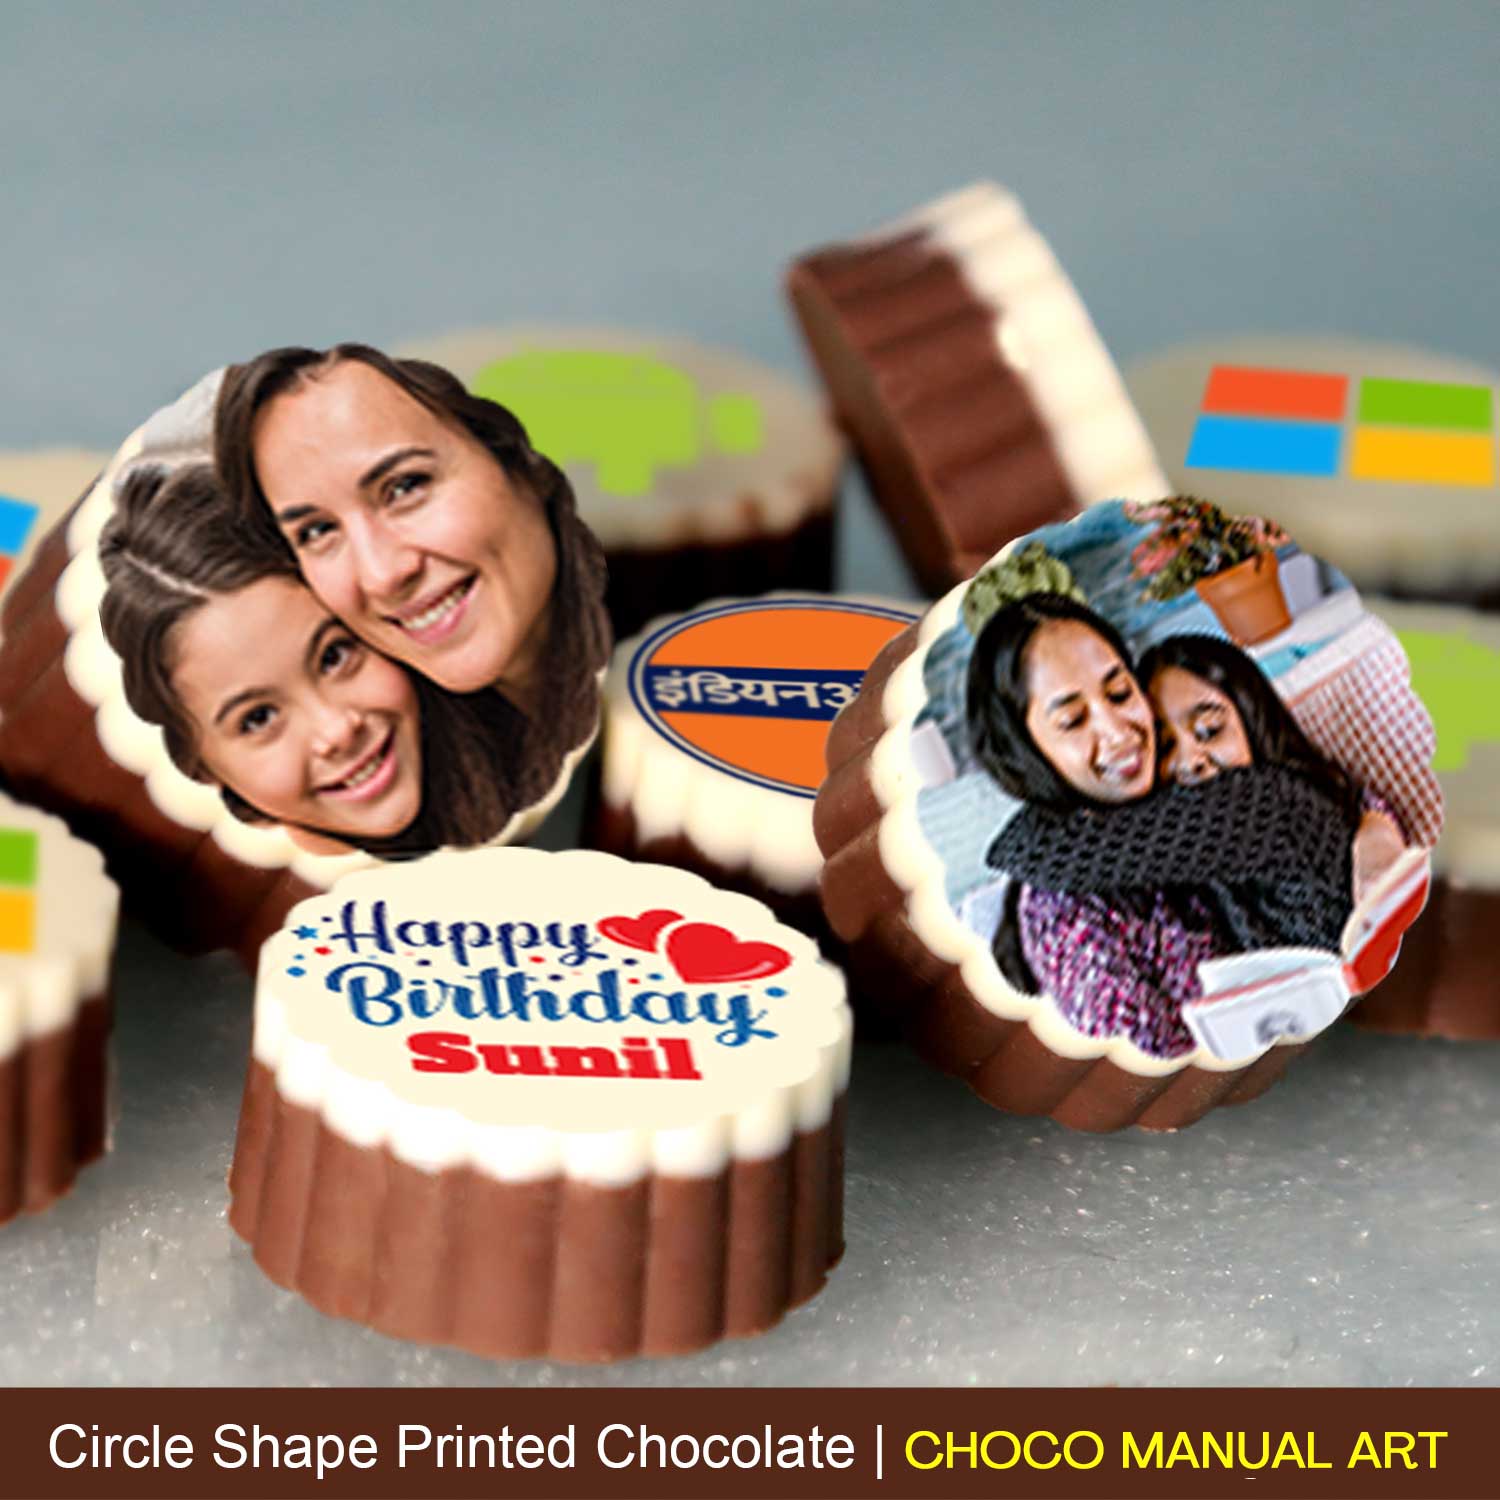 Creative Design of mom-baby Printed Chocolates with floral touch